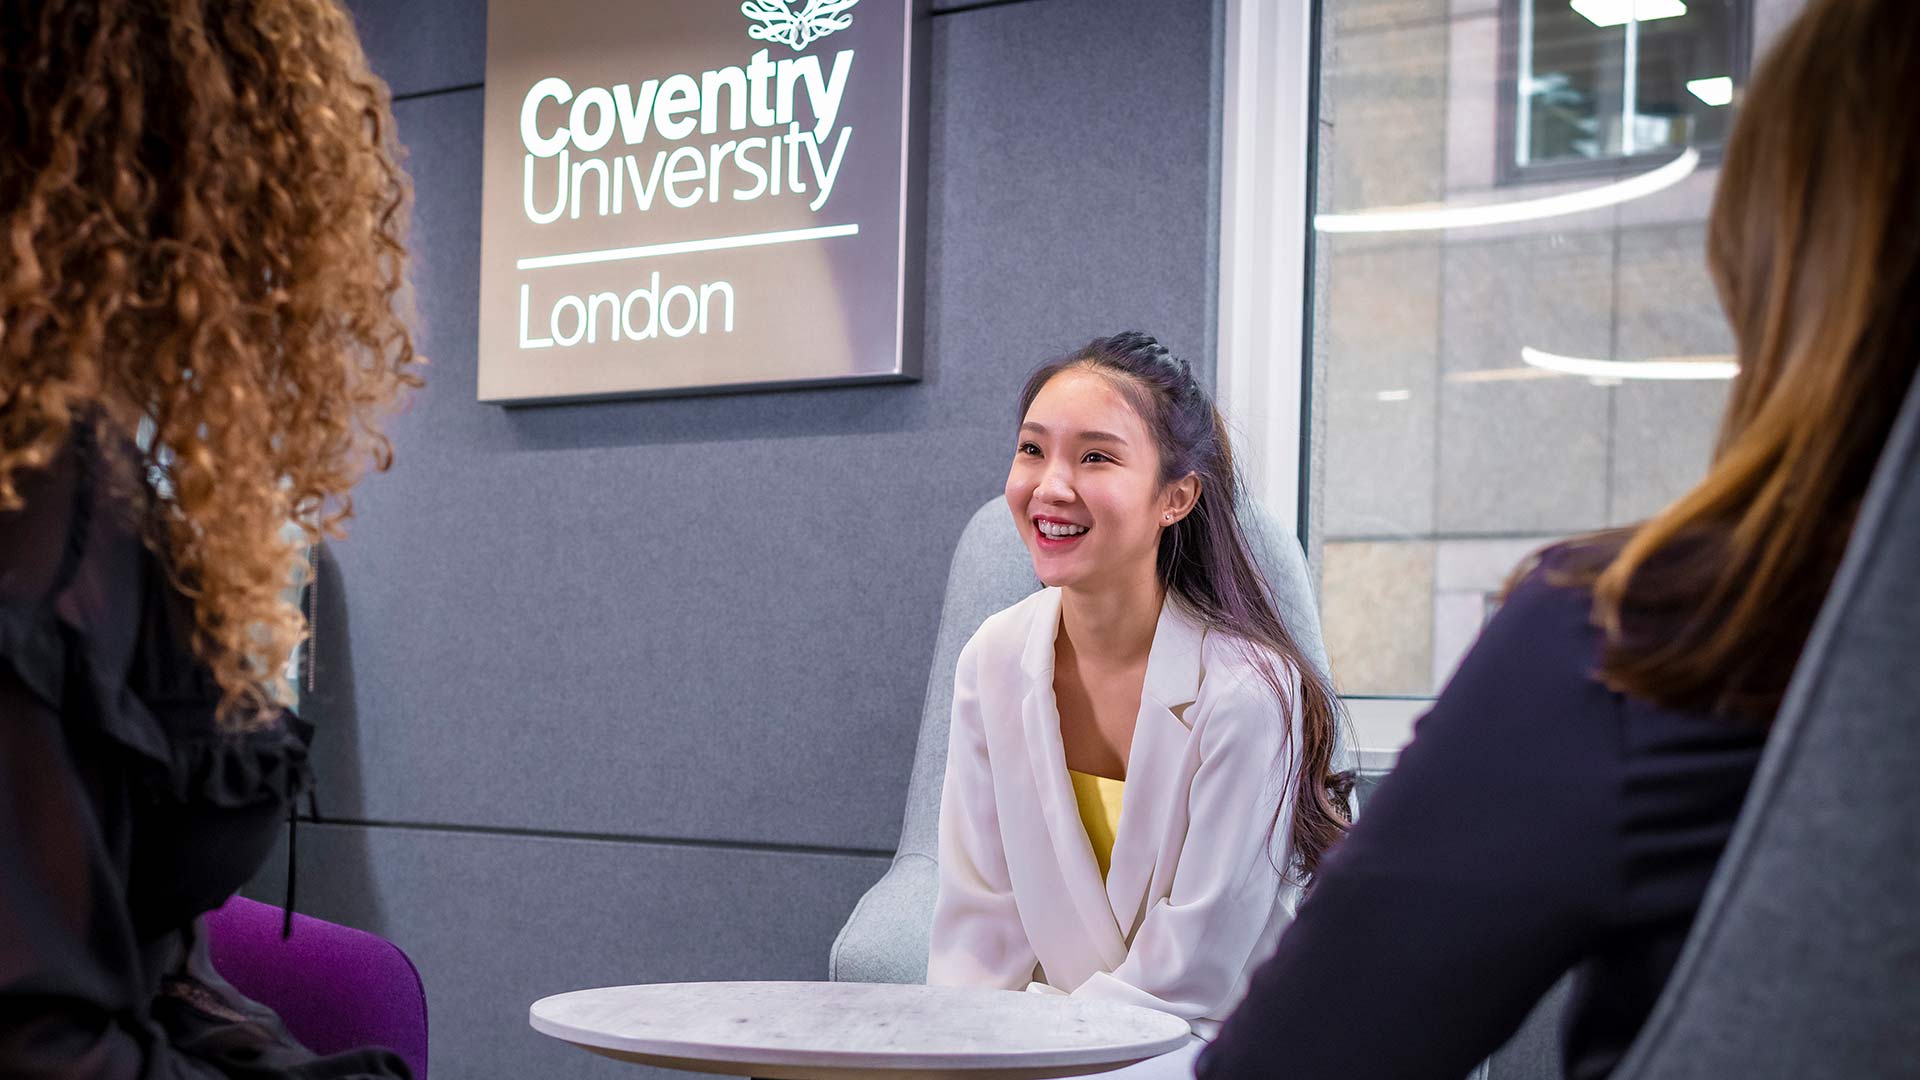 young female student chatting to two other students with the coventry university london sign on the wall in the background 